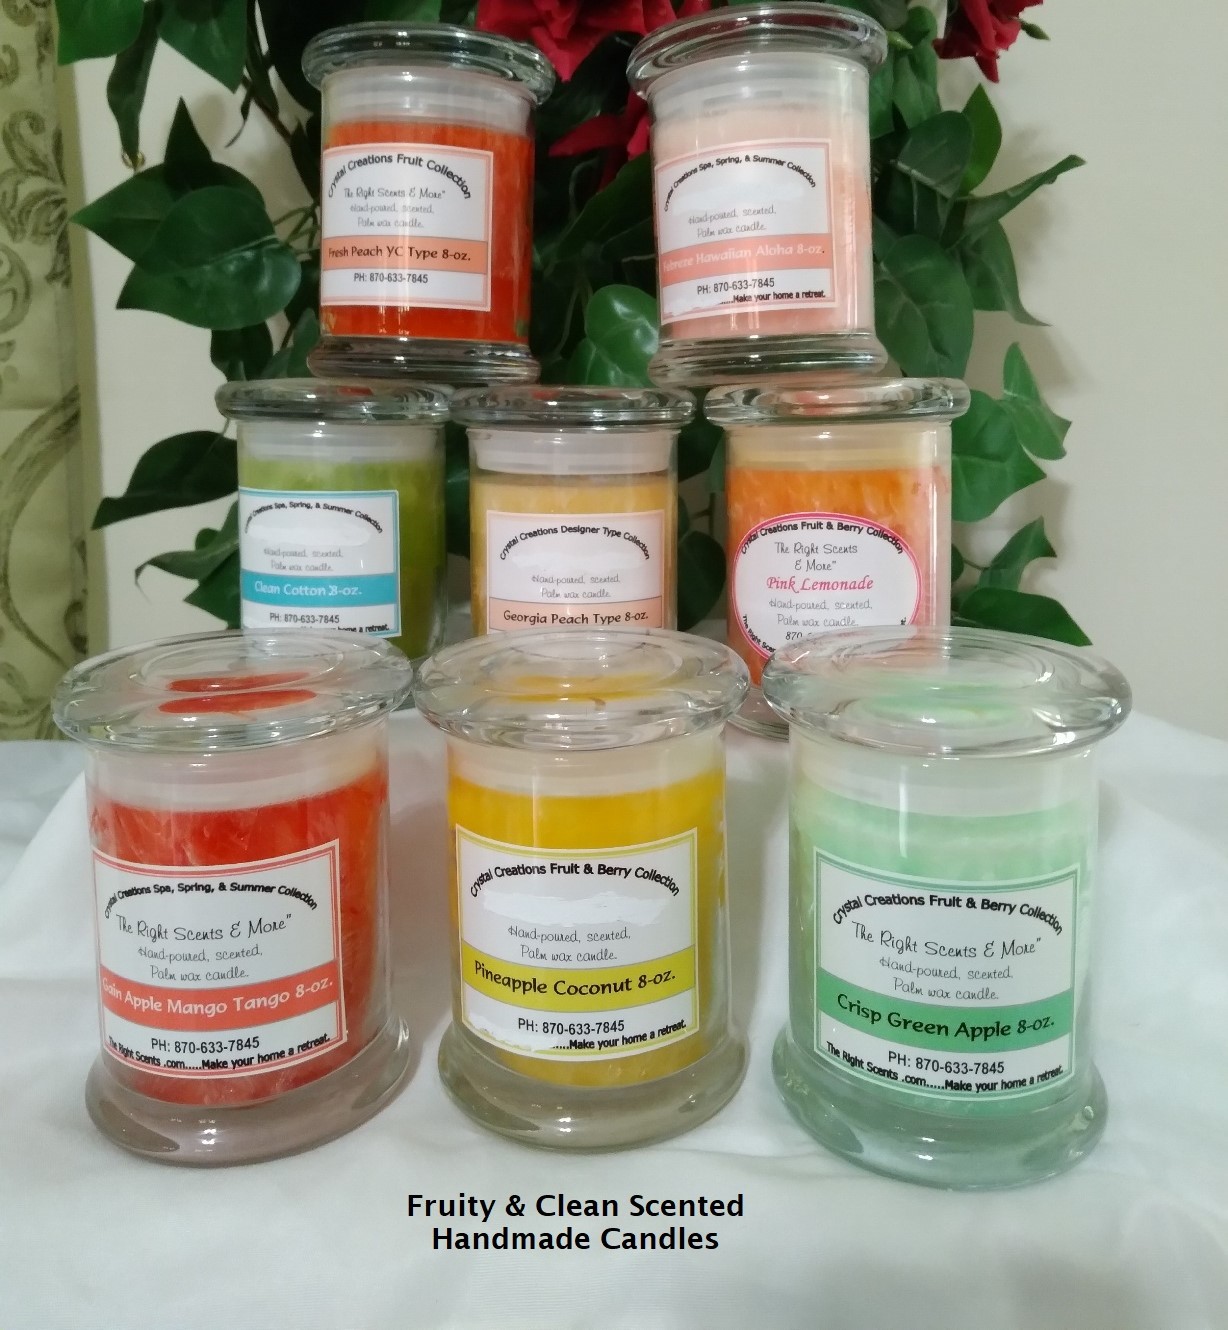 Fruity & Clean 8-oz. Candles